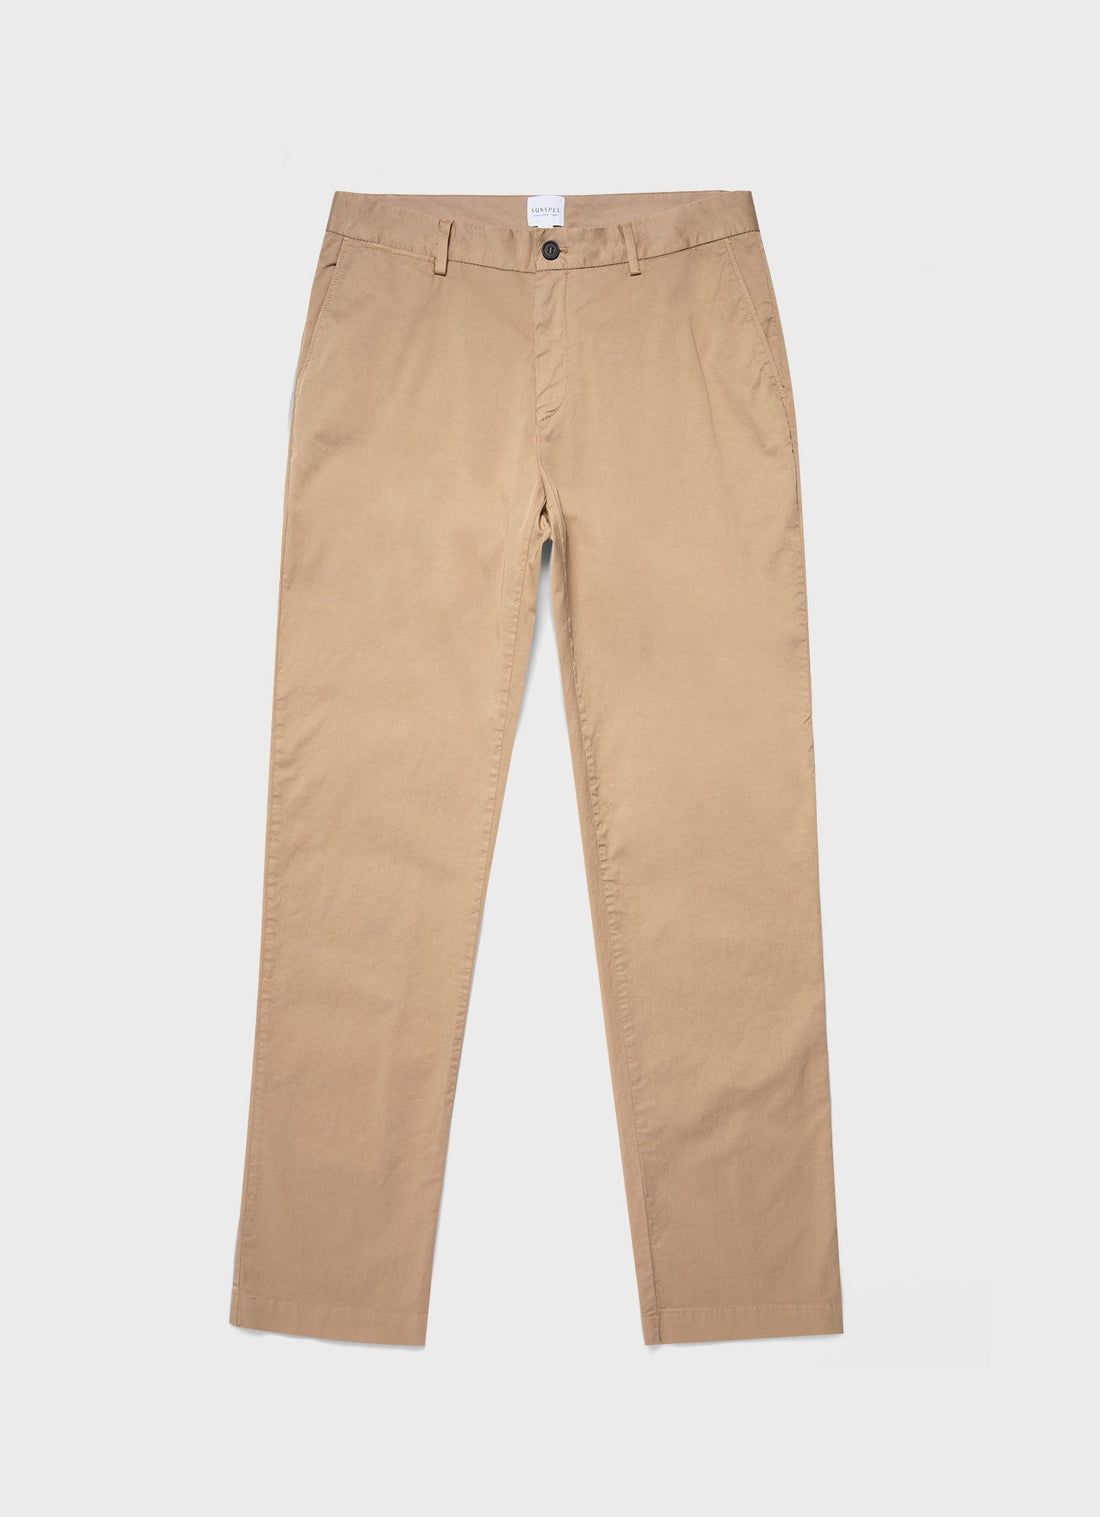 Men's Regular Fit Stretch Chino in Stone